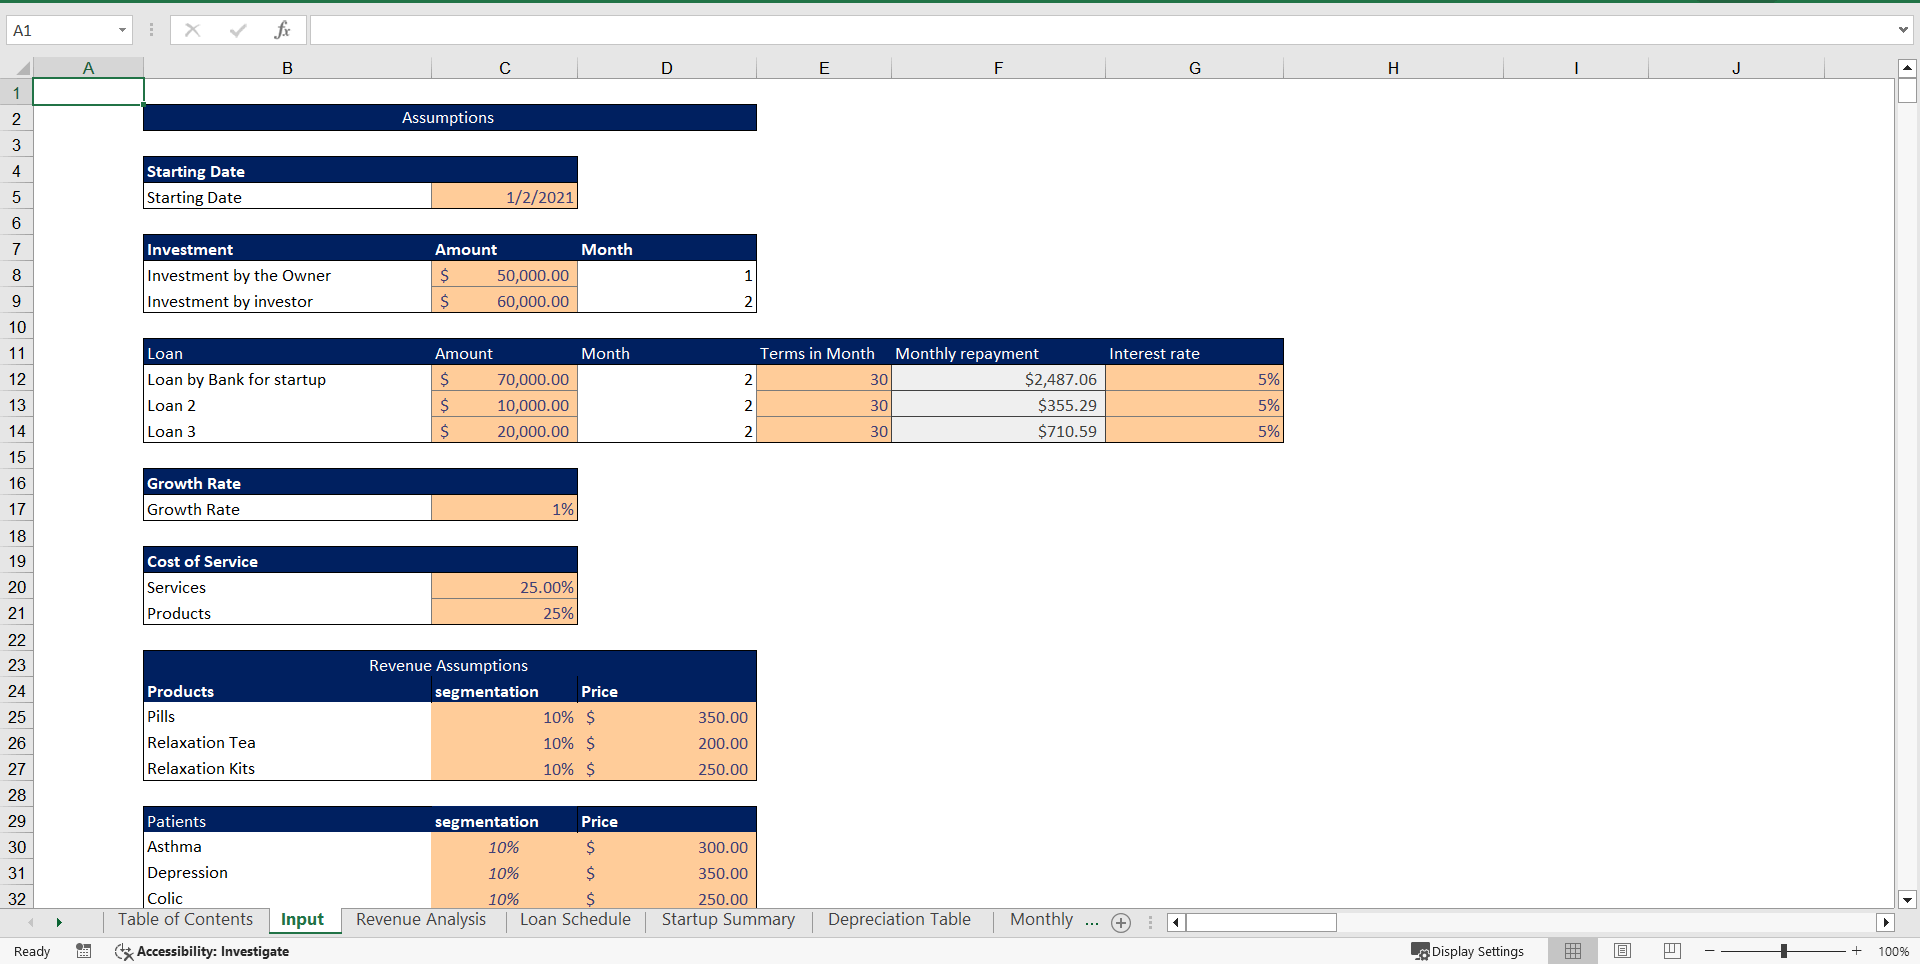 Osteopathy Center Excel Financial Model Template